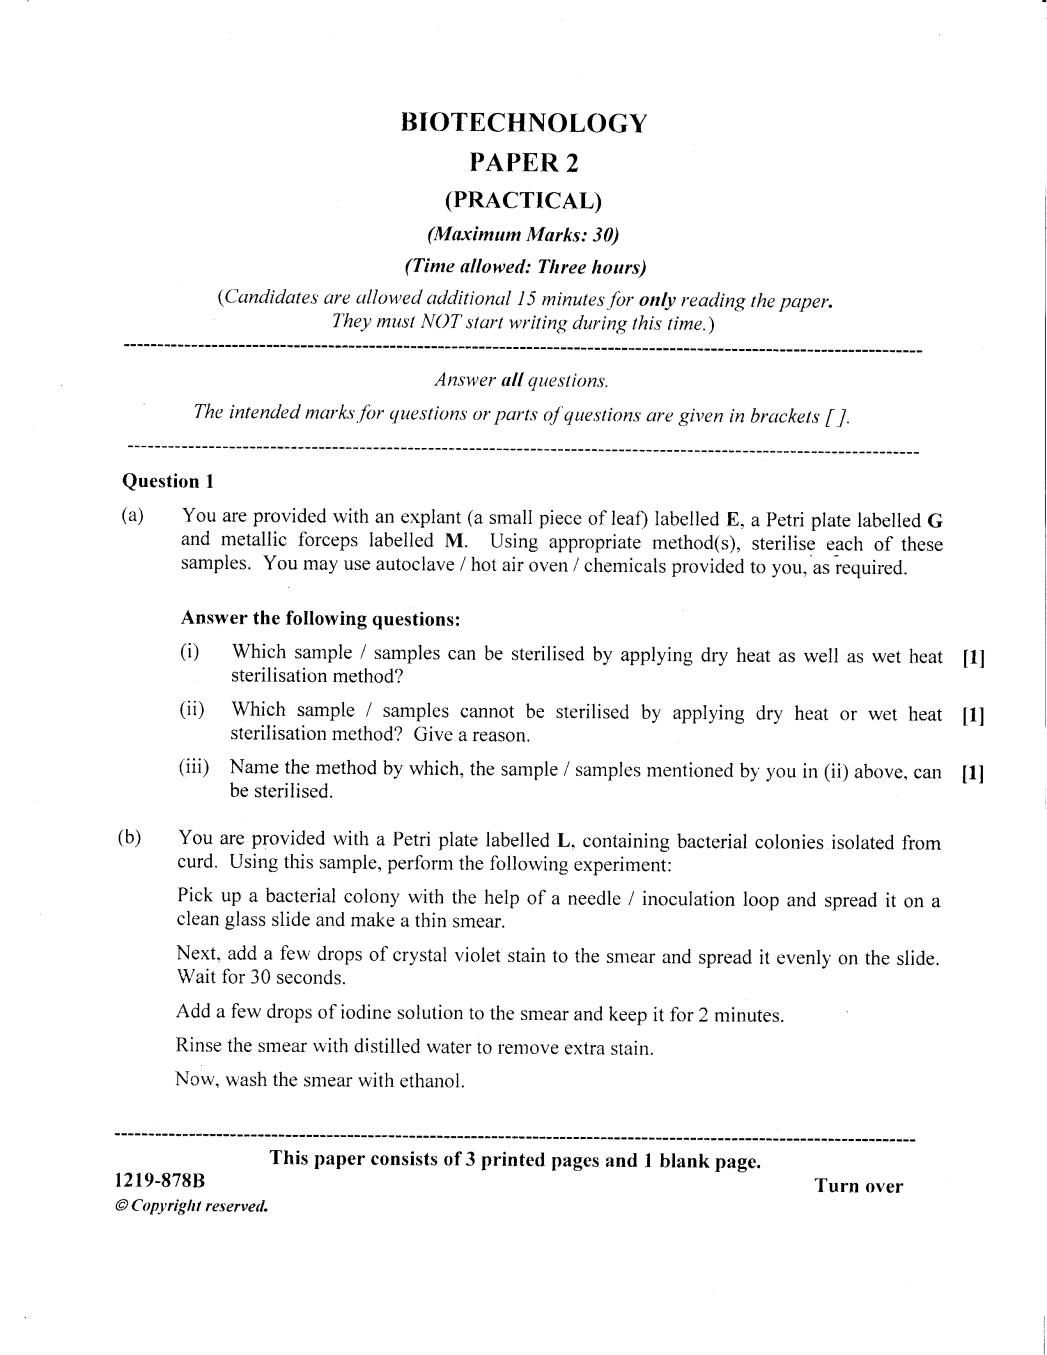 ISC Class 12 Question Paper 2019 for Biotechnology Paper 2 - Page 1